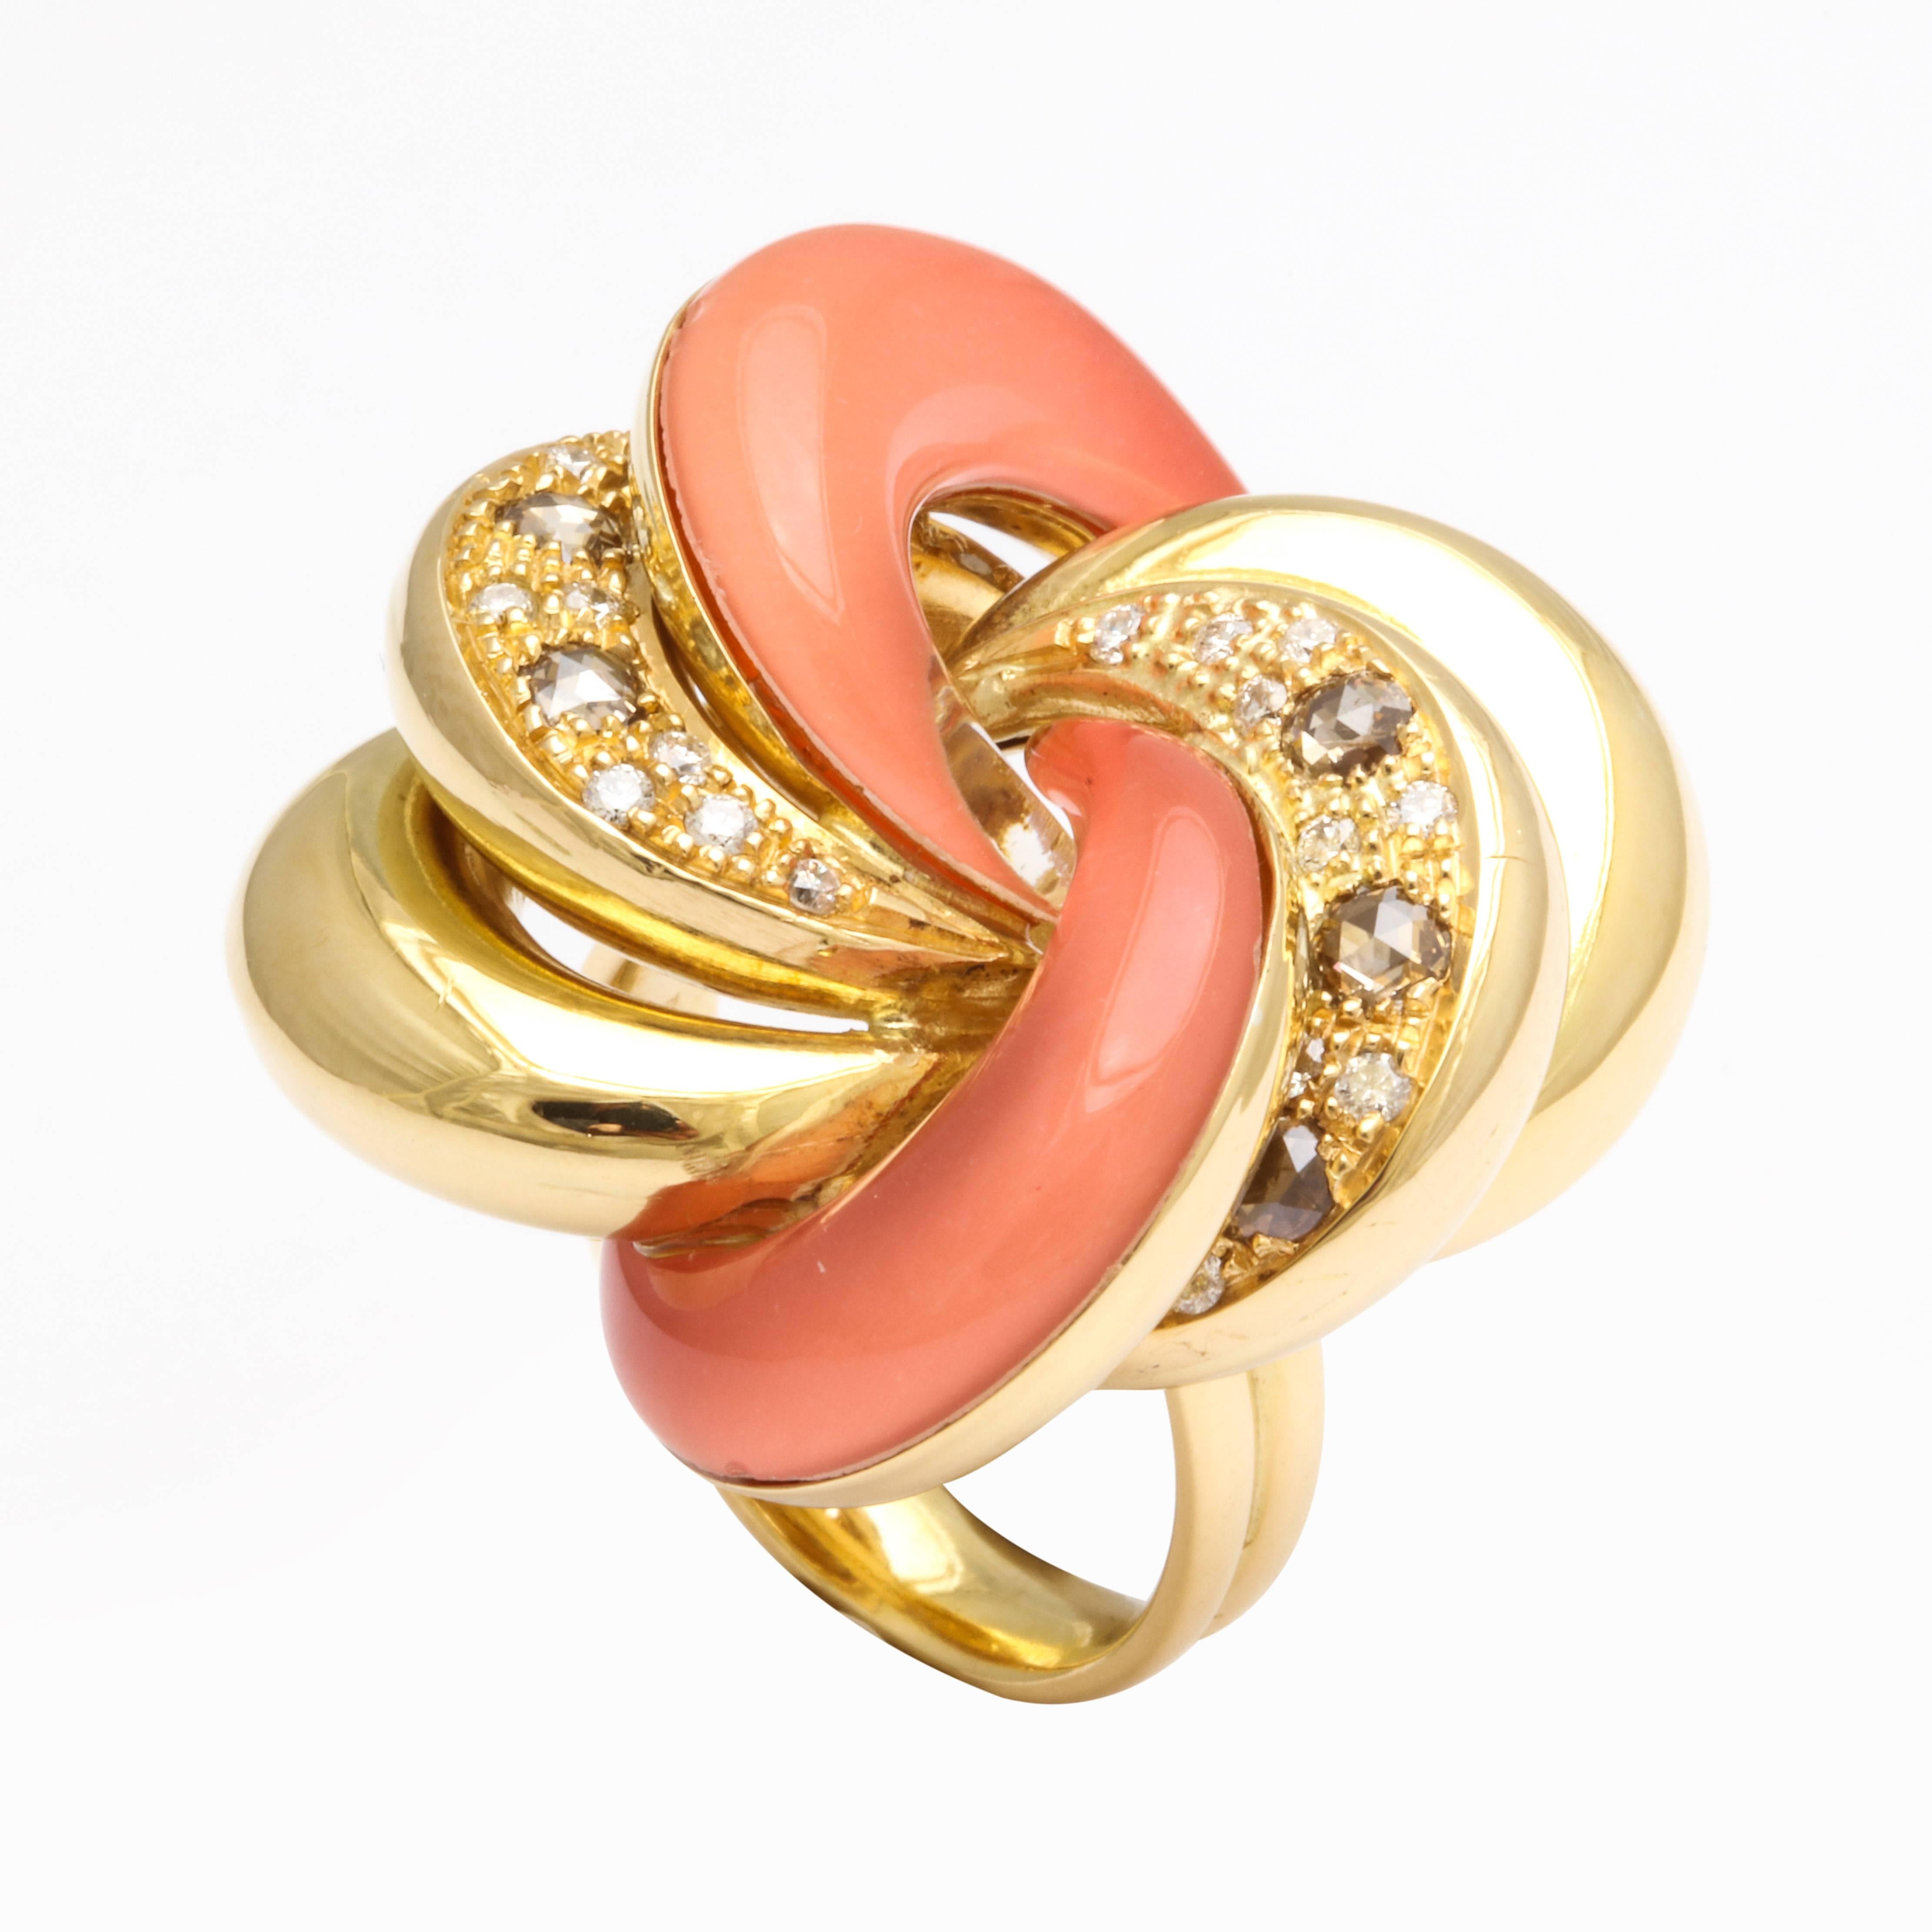 Faraone Mennella Roselline Coral Diamond Gold Ring In New Condition For Sale In New York, NY